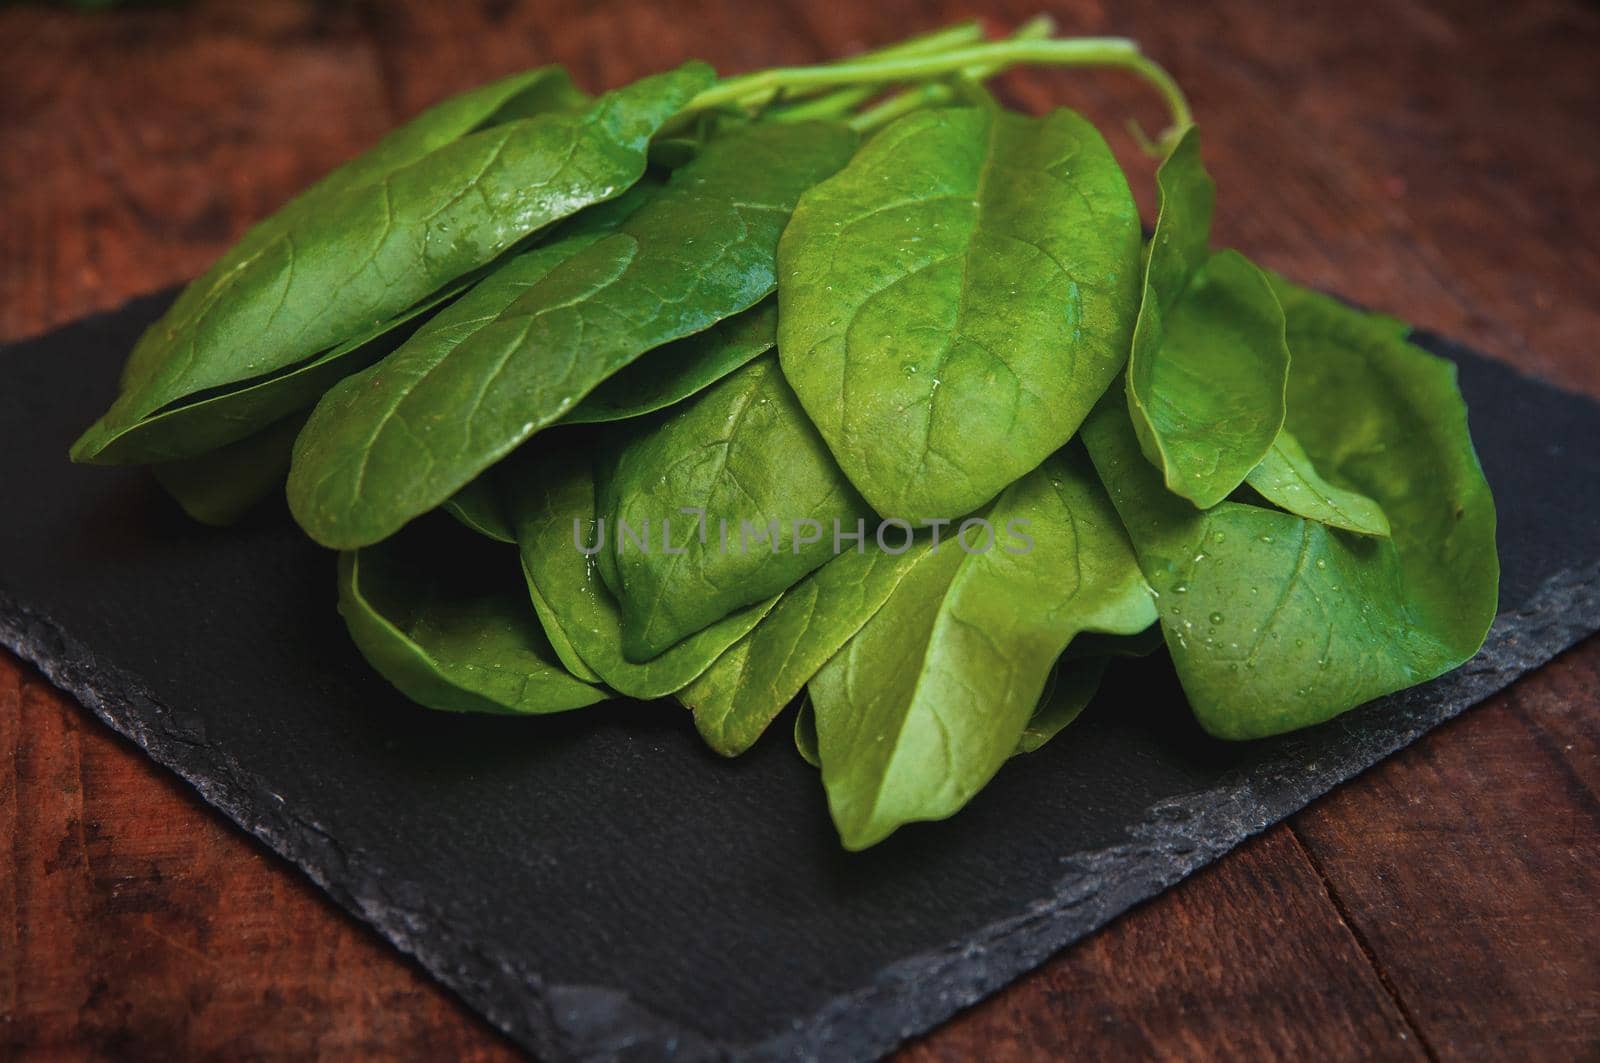 fresh spinach lies on a black presentation board located on a brown wooden table